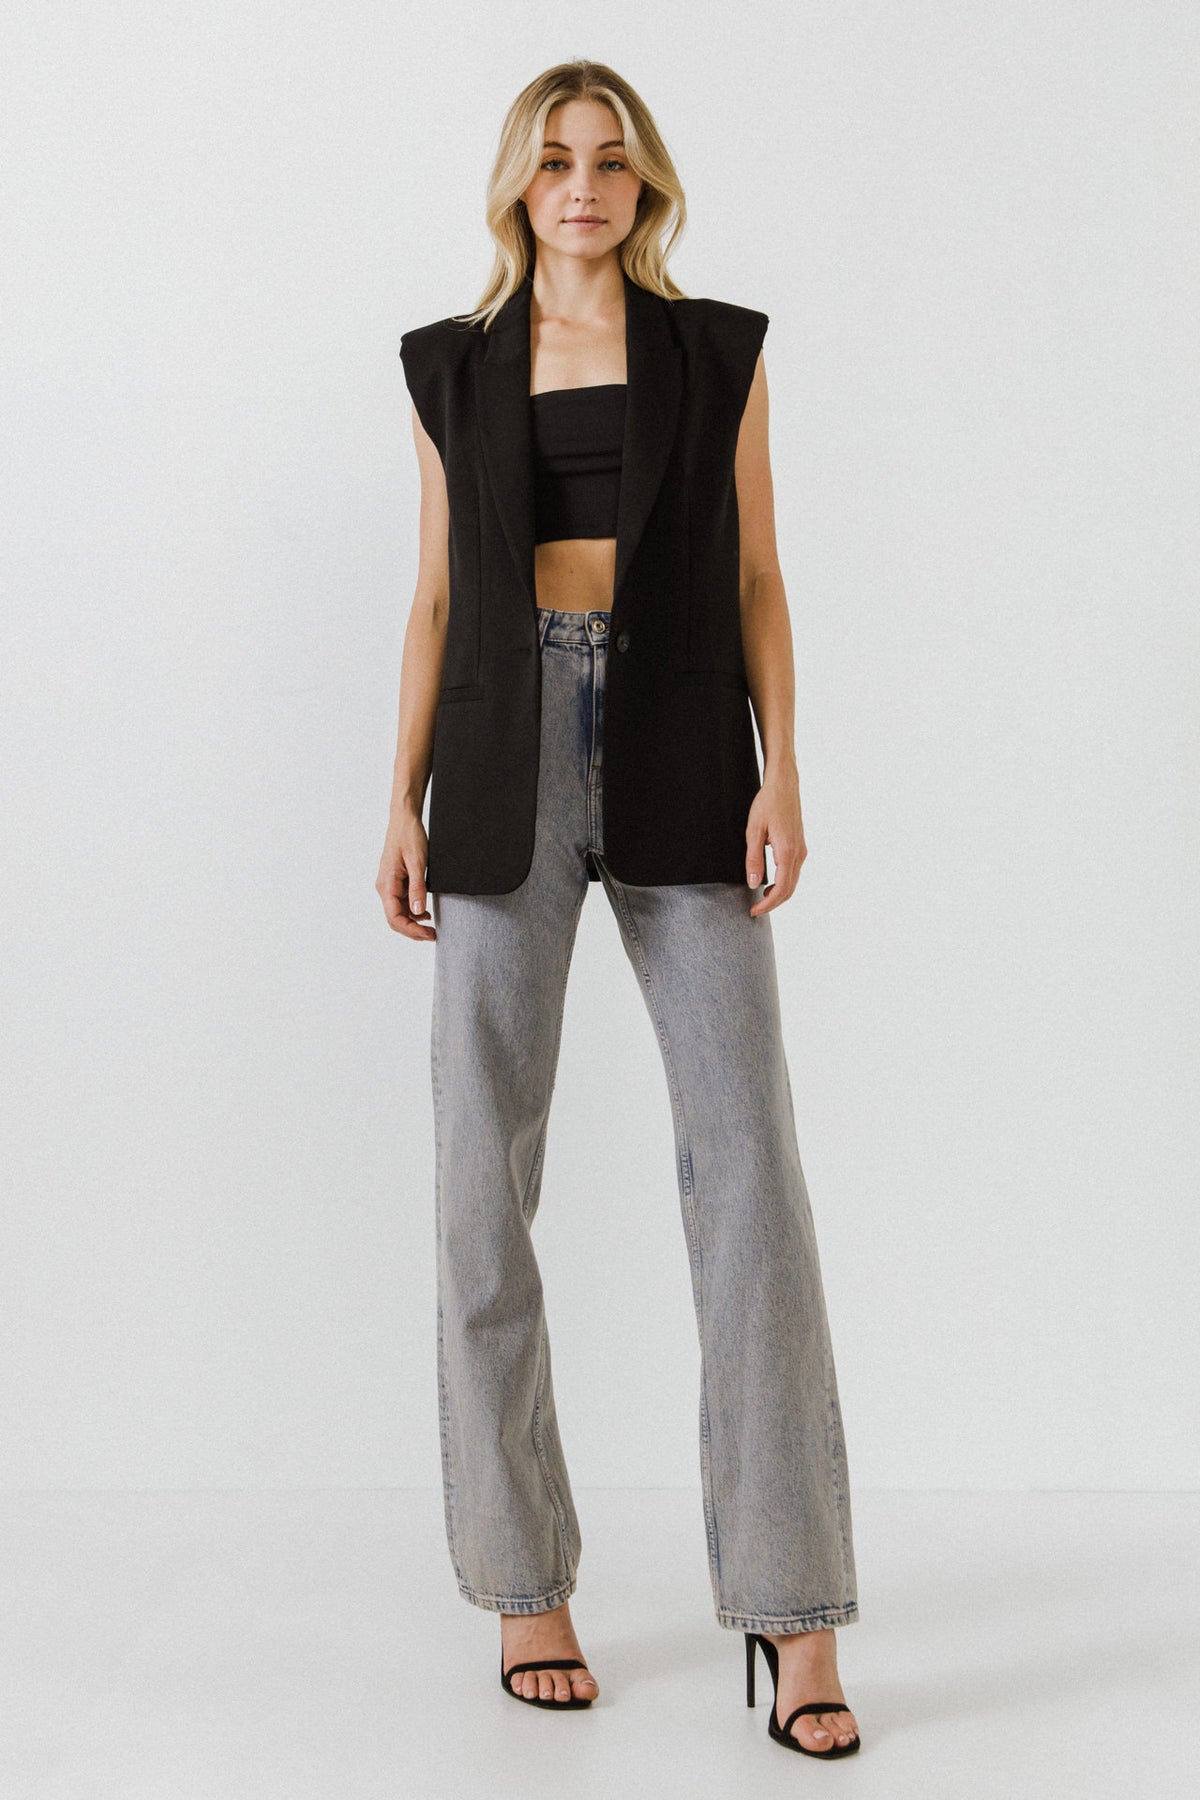 ENDLESS ROSE - Shoulder Pad Vest - BLAZERS available at Objectrare